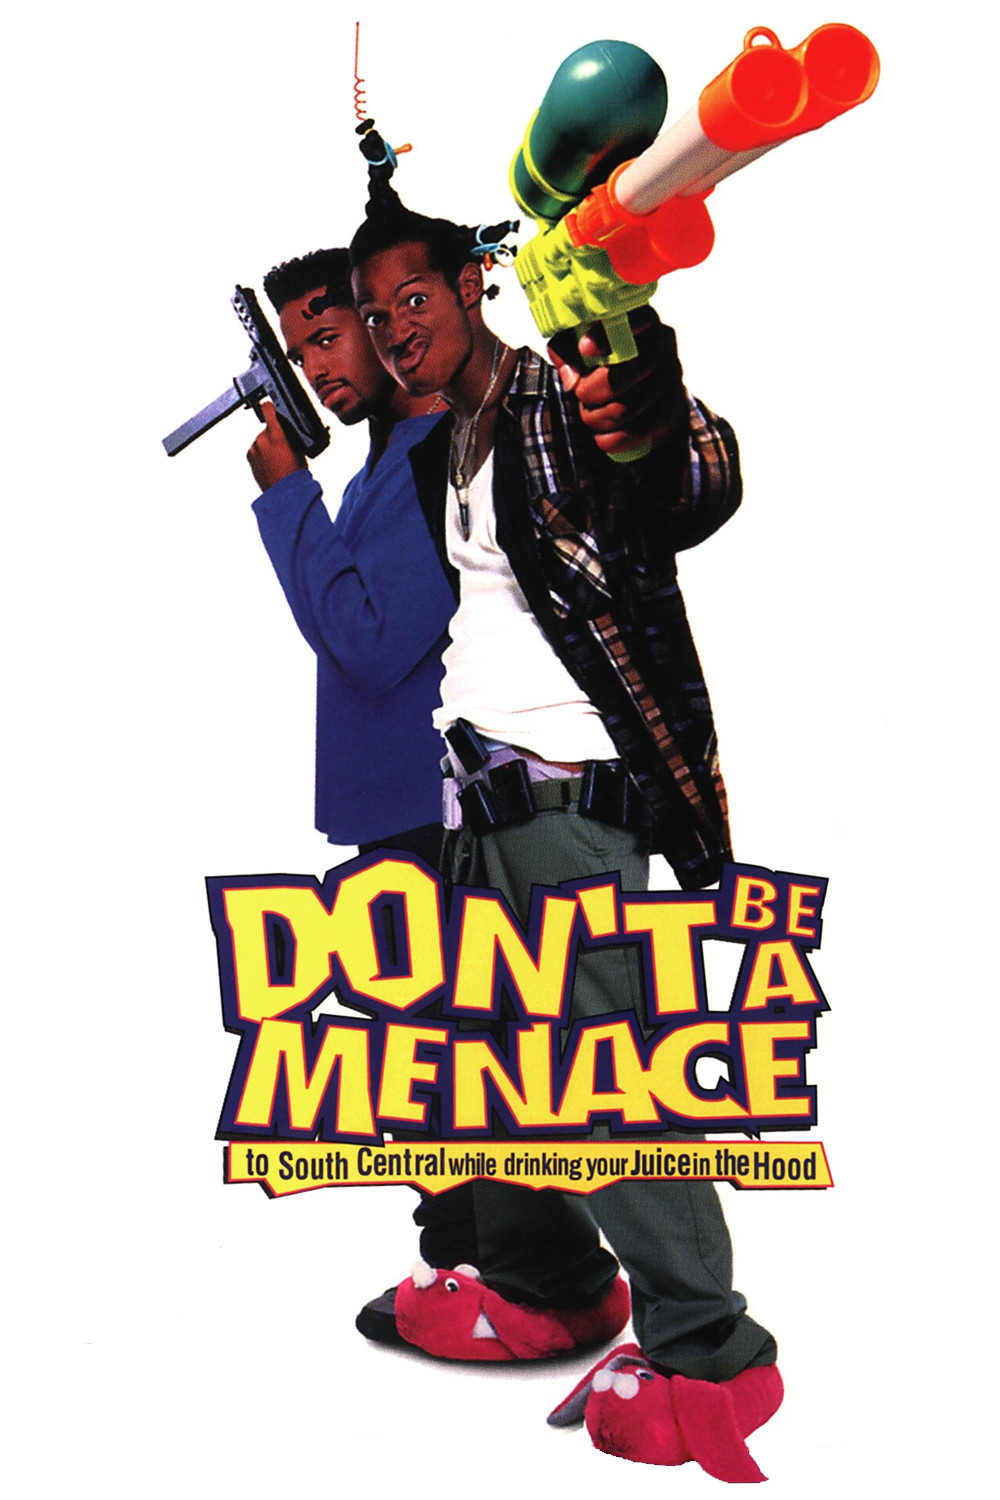 BACK IN THE DAY |1/12/96| The movie, Don’t Be a Menace to South Central While Drinking